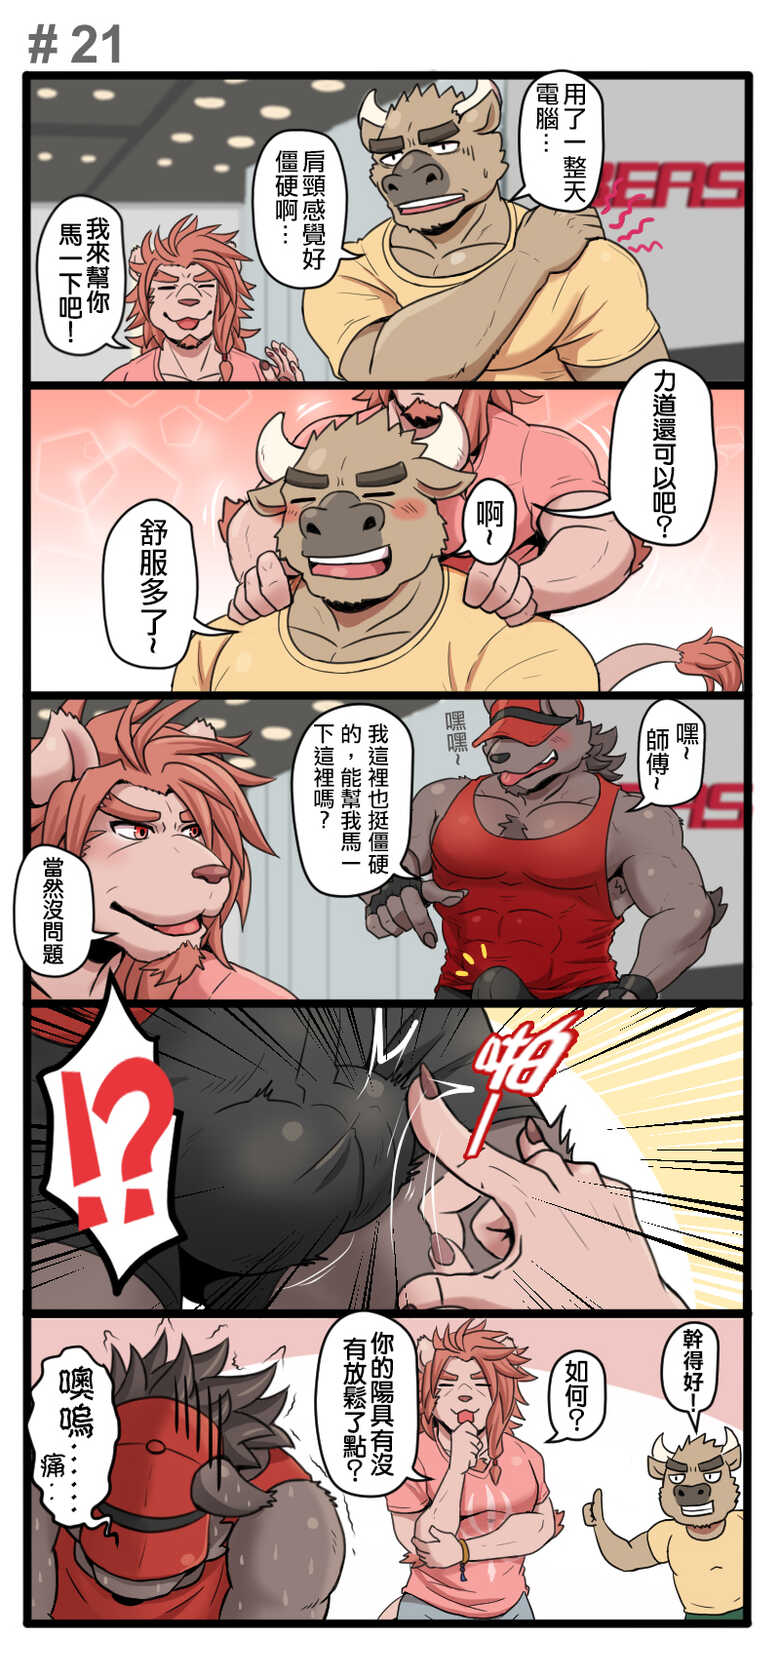 [Ripple Moon] Gym Pals (健身小哥) (Ongoing) [Chinese] [连载中] - Page 21